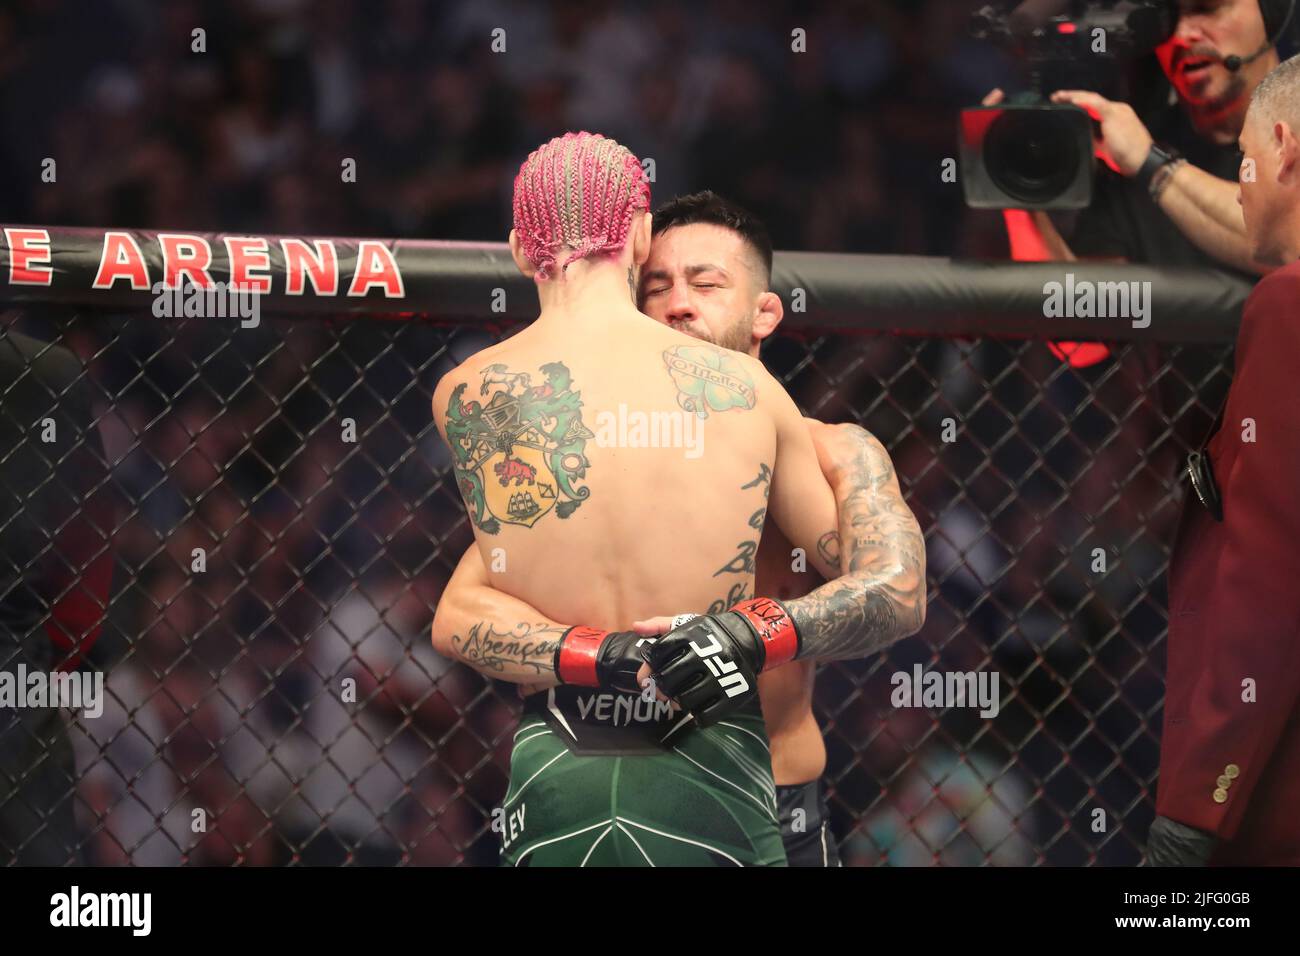 Las Vegas, United States. 02nd July, 2022. LAS VEGAS, NV - JULY 2: (R-L) Pedro Munhoz reacts after an inadvertent eye poke from O'Malley in their Bantamweight bout during the UFC 276 event at the T-Mobile Arena on July 2, 2022 in Las Vegas, Nevada, United States. (Photo by Alejandro Salazar/PxImages) Credit: Px Images/Alamy Live News Stock Photo